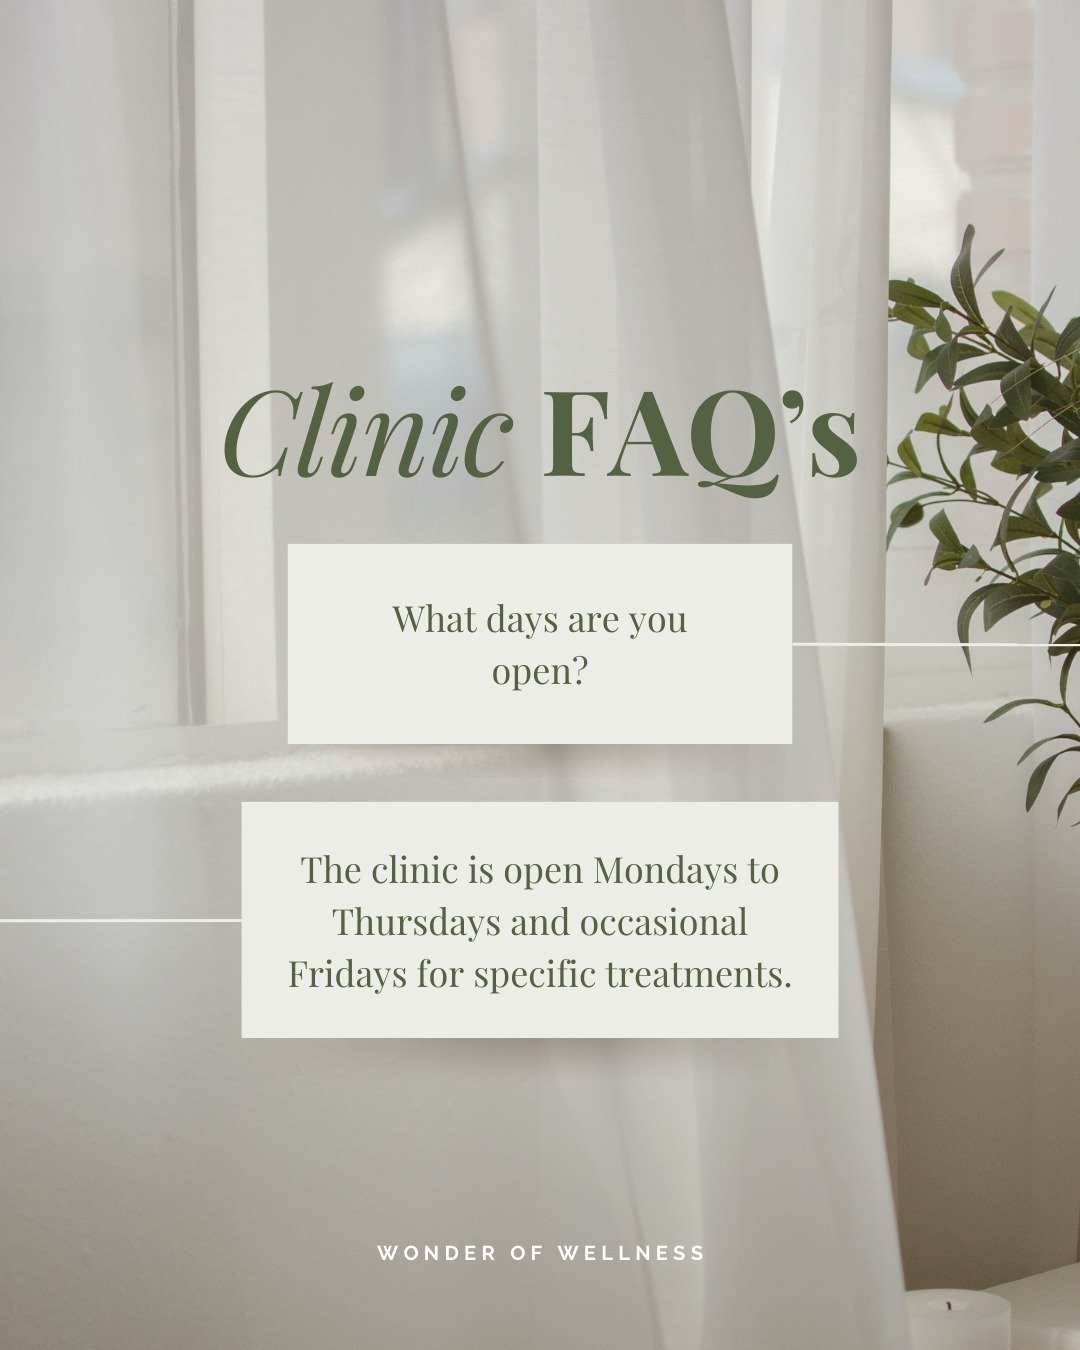 Answering the clinic's most frequently asked questions 🌿 [Swipe]

Curious about a different approach to dentistry? Explore our heart-centered clinic by booking your appointment via the l1nk in bio. 

Got another question? Pop it below or send us a D